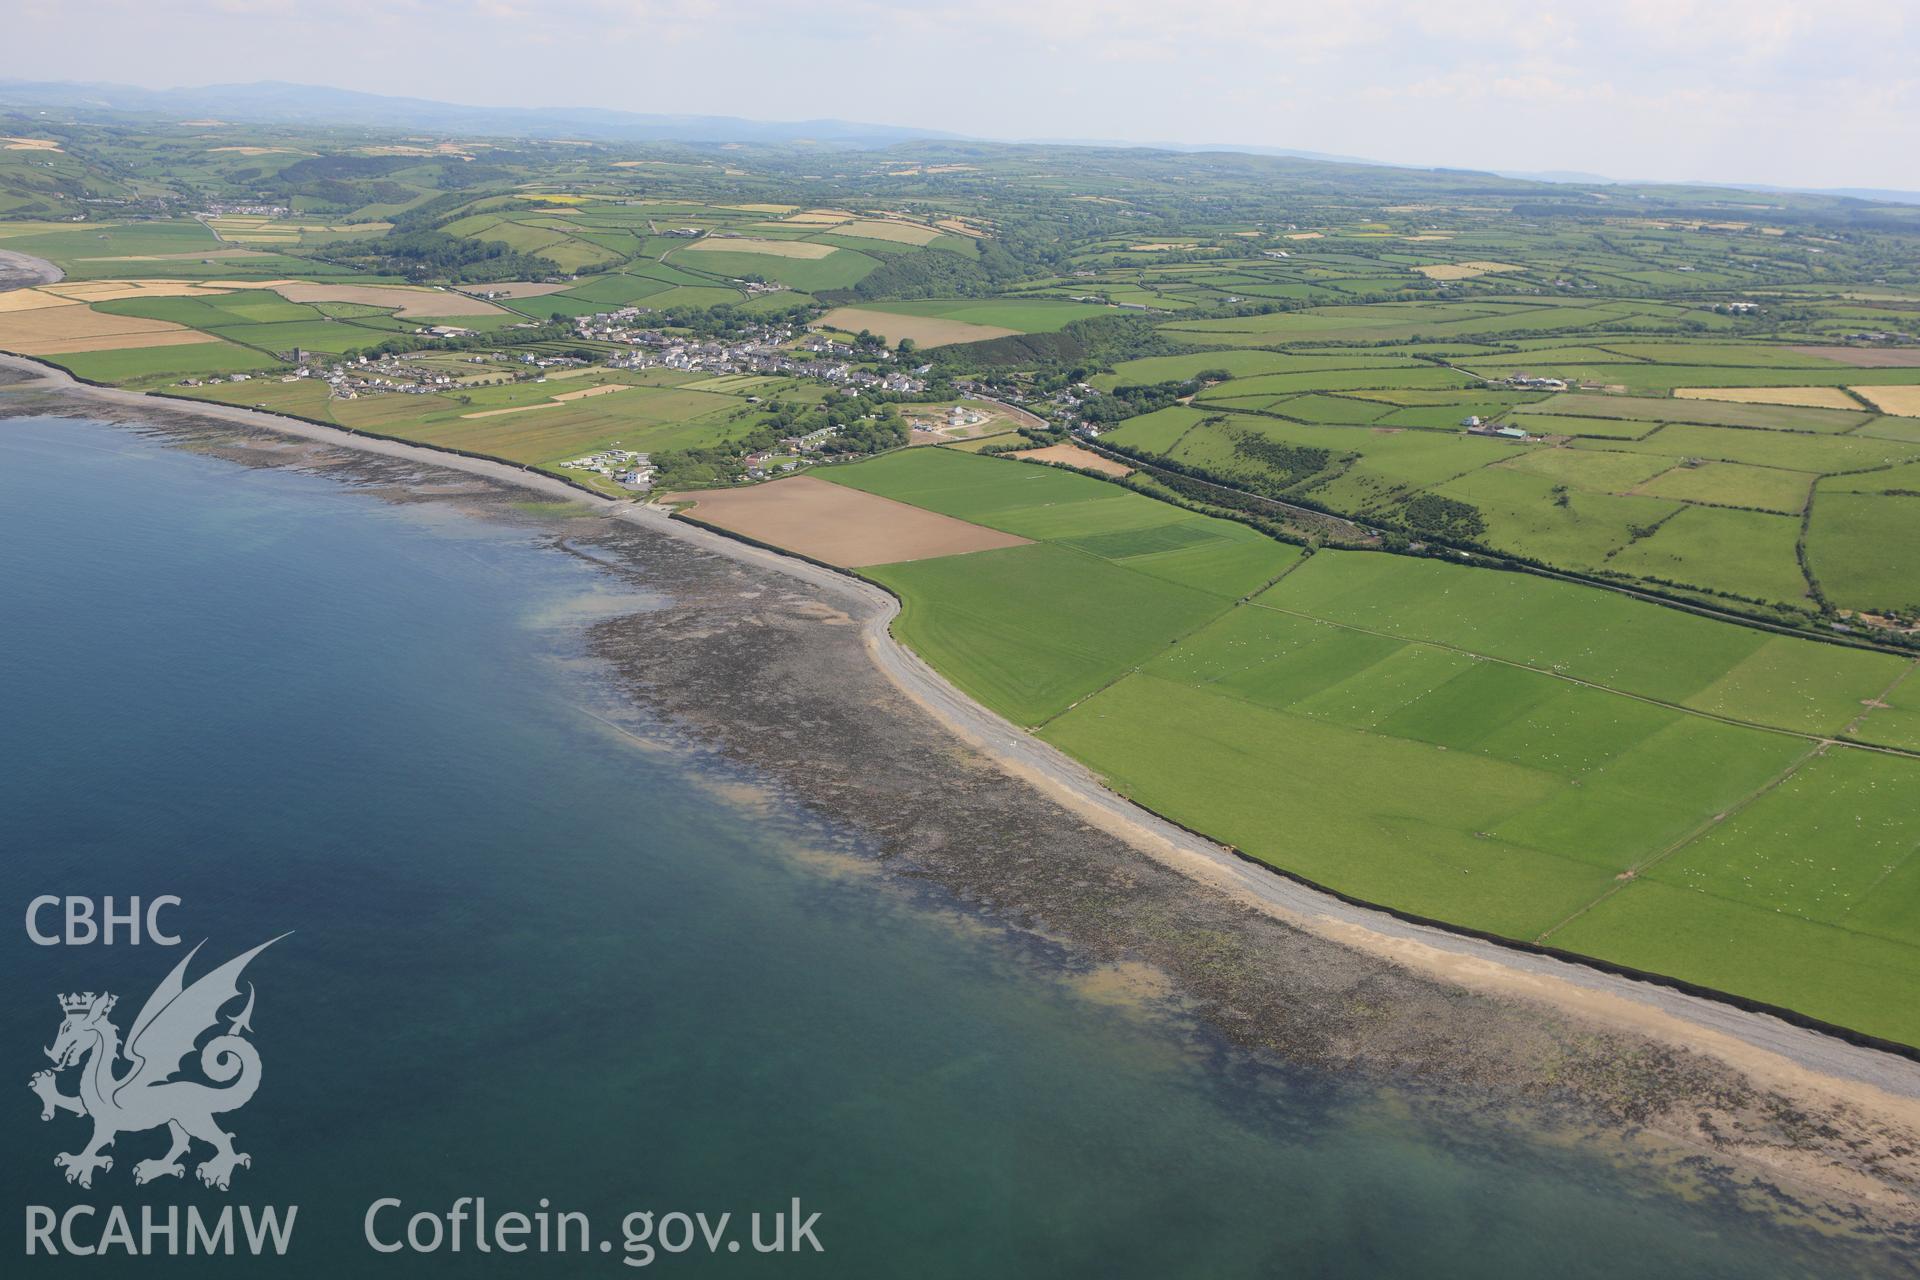 RCAHMW colour oblique aerial photograph of Llanon foreshore and Fishtraps. Taken on 02 June 2009 by Toby Driver